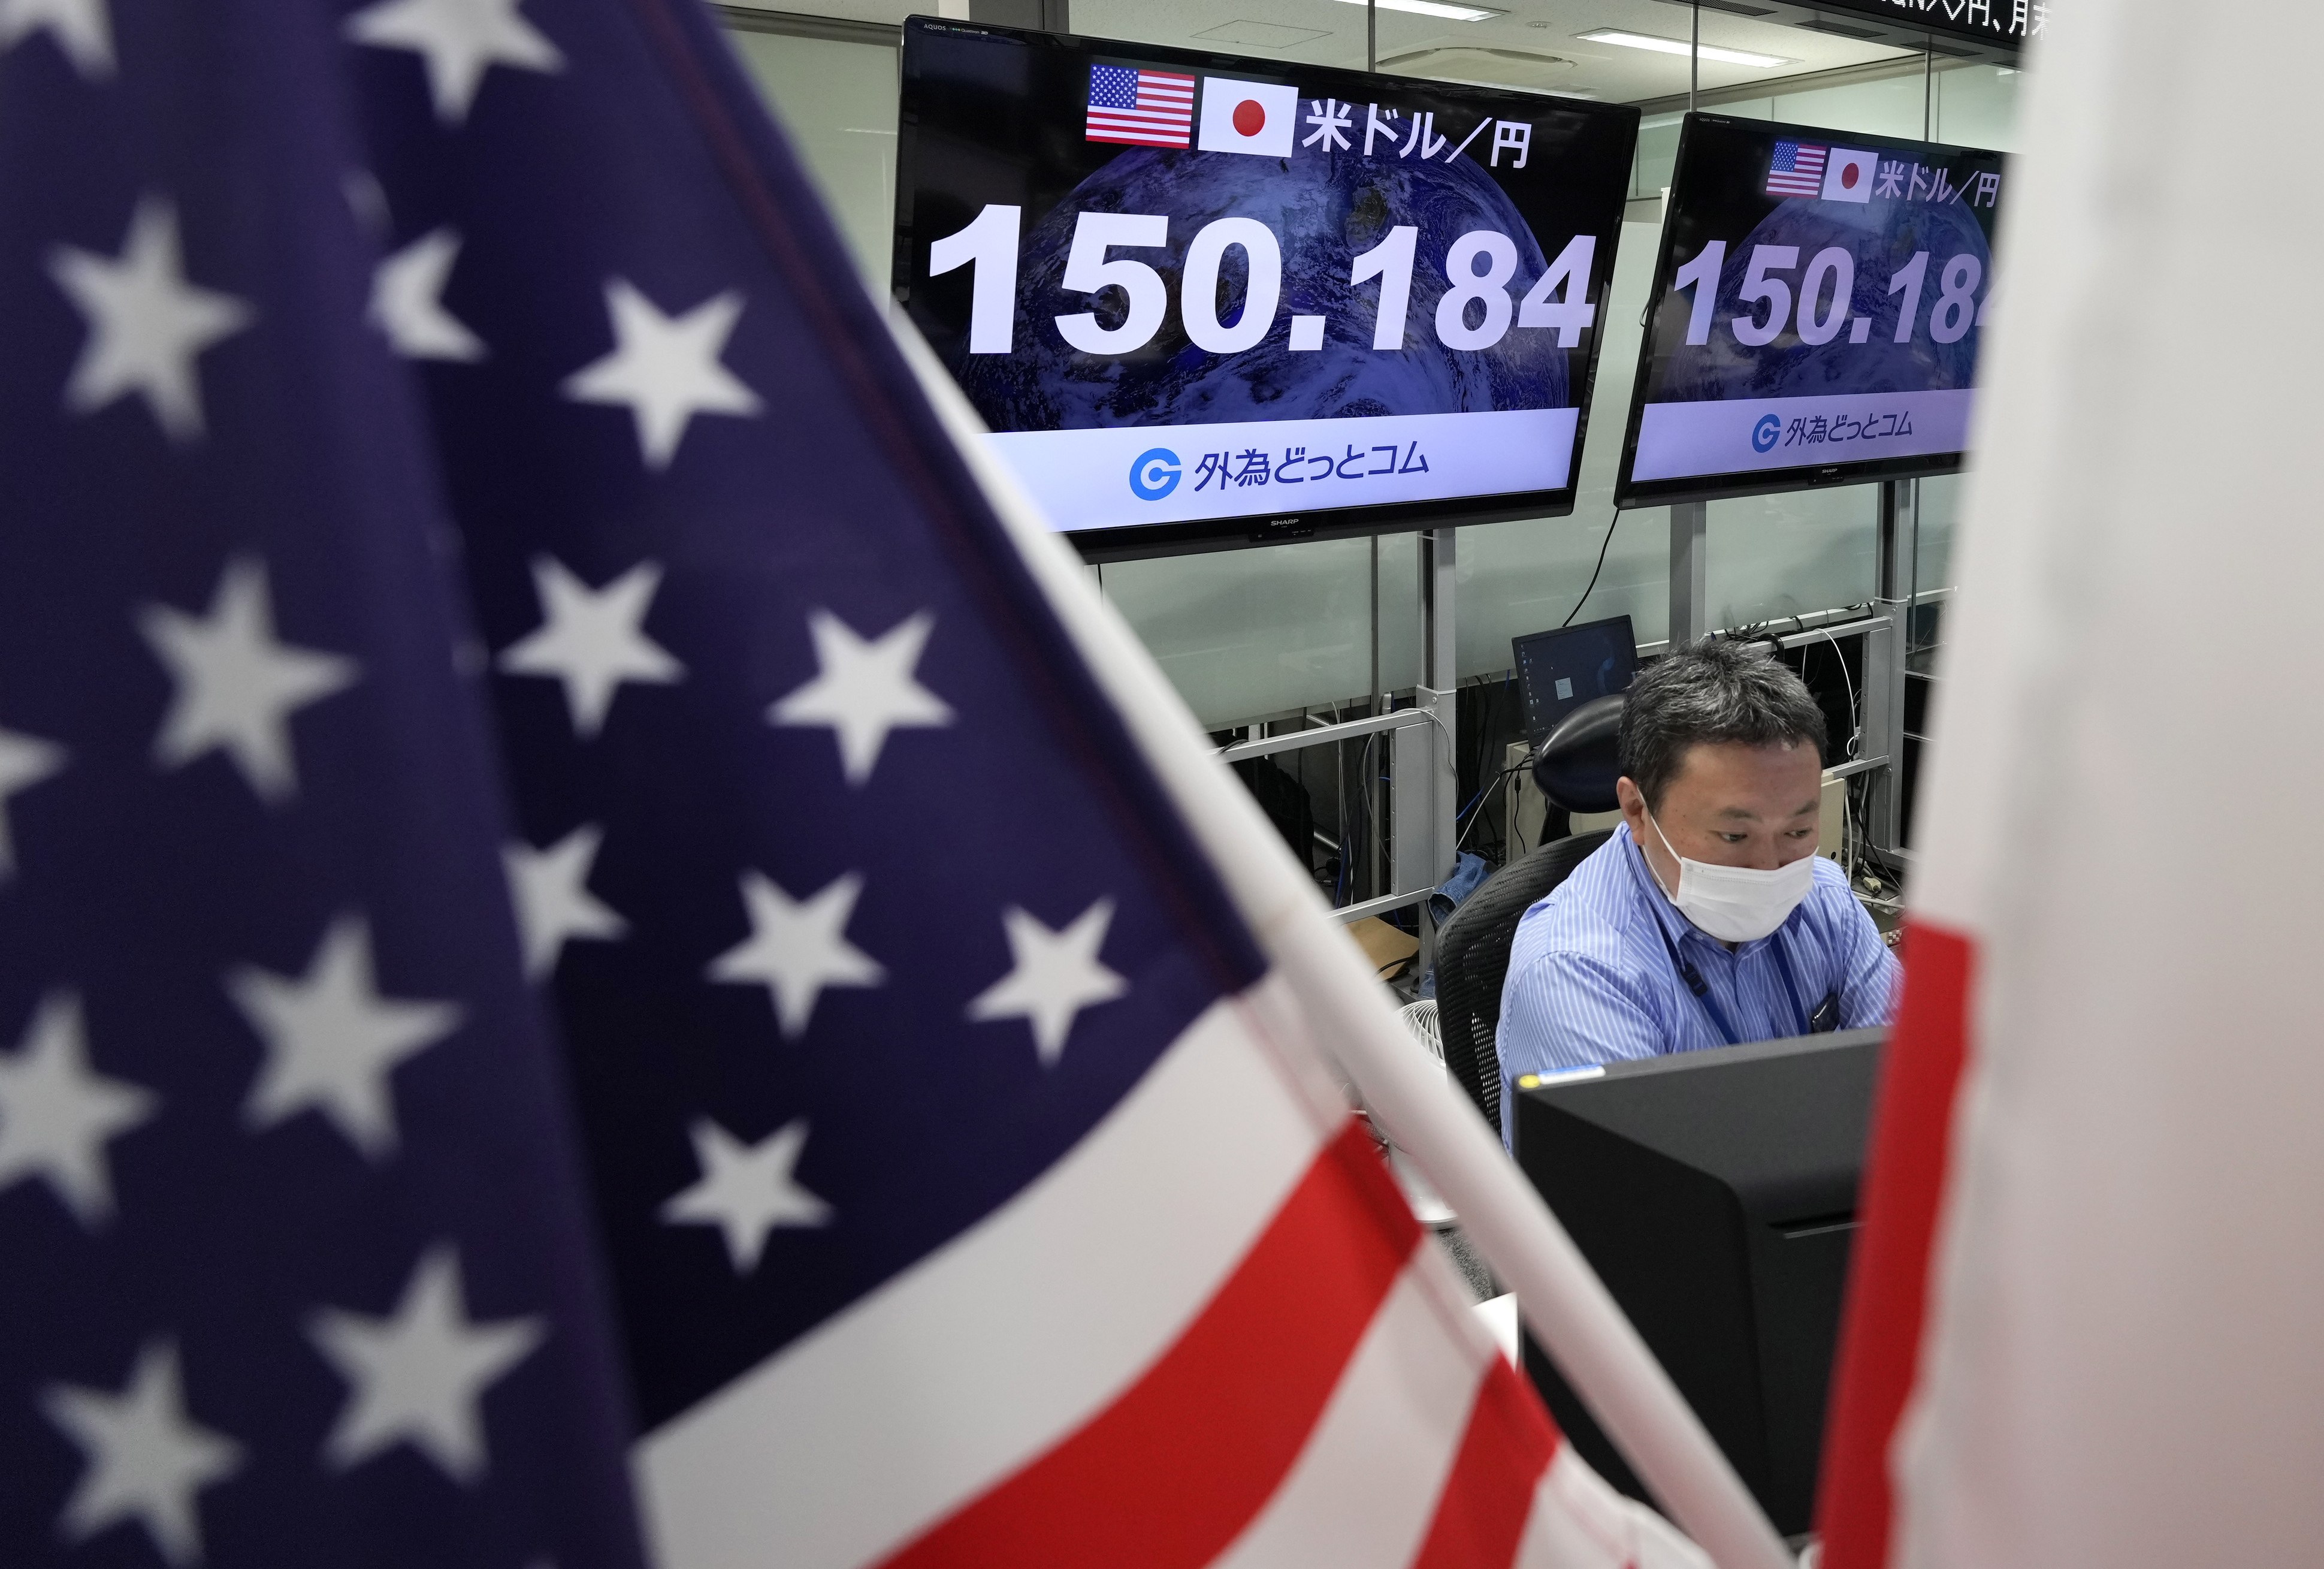 A dealer works as displays show the exchange rate between the Japanese yen and the US dollar at a foreign exchange trading company in Tokyo on October 21. The yen continues its fall against the US dollar, hitting a 32-year low, to remain in the 150 range. Photo: EPA-EFE